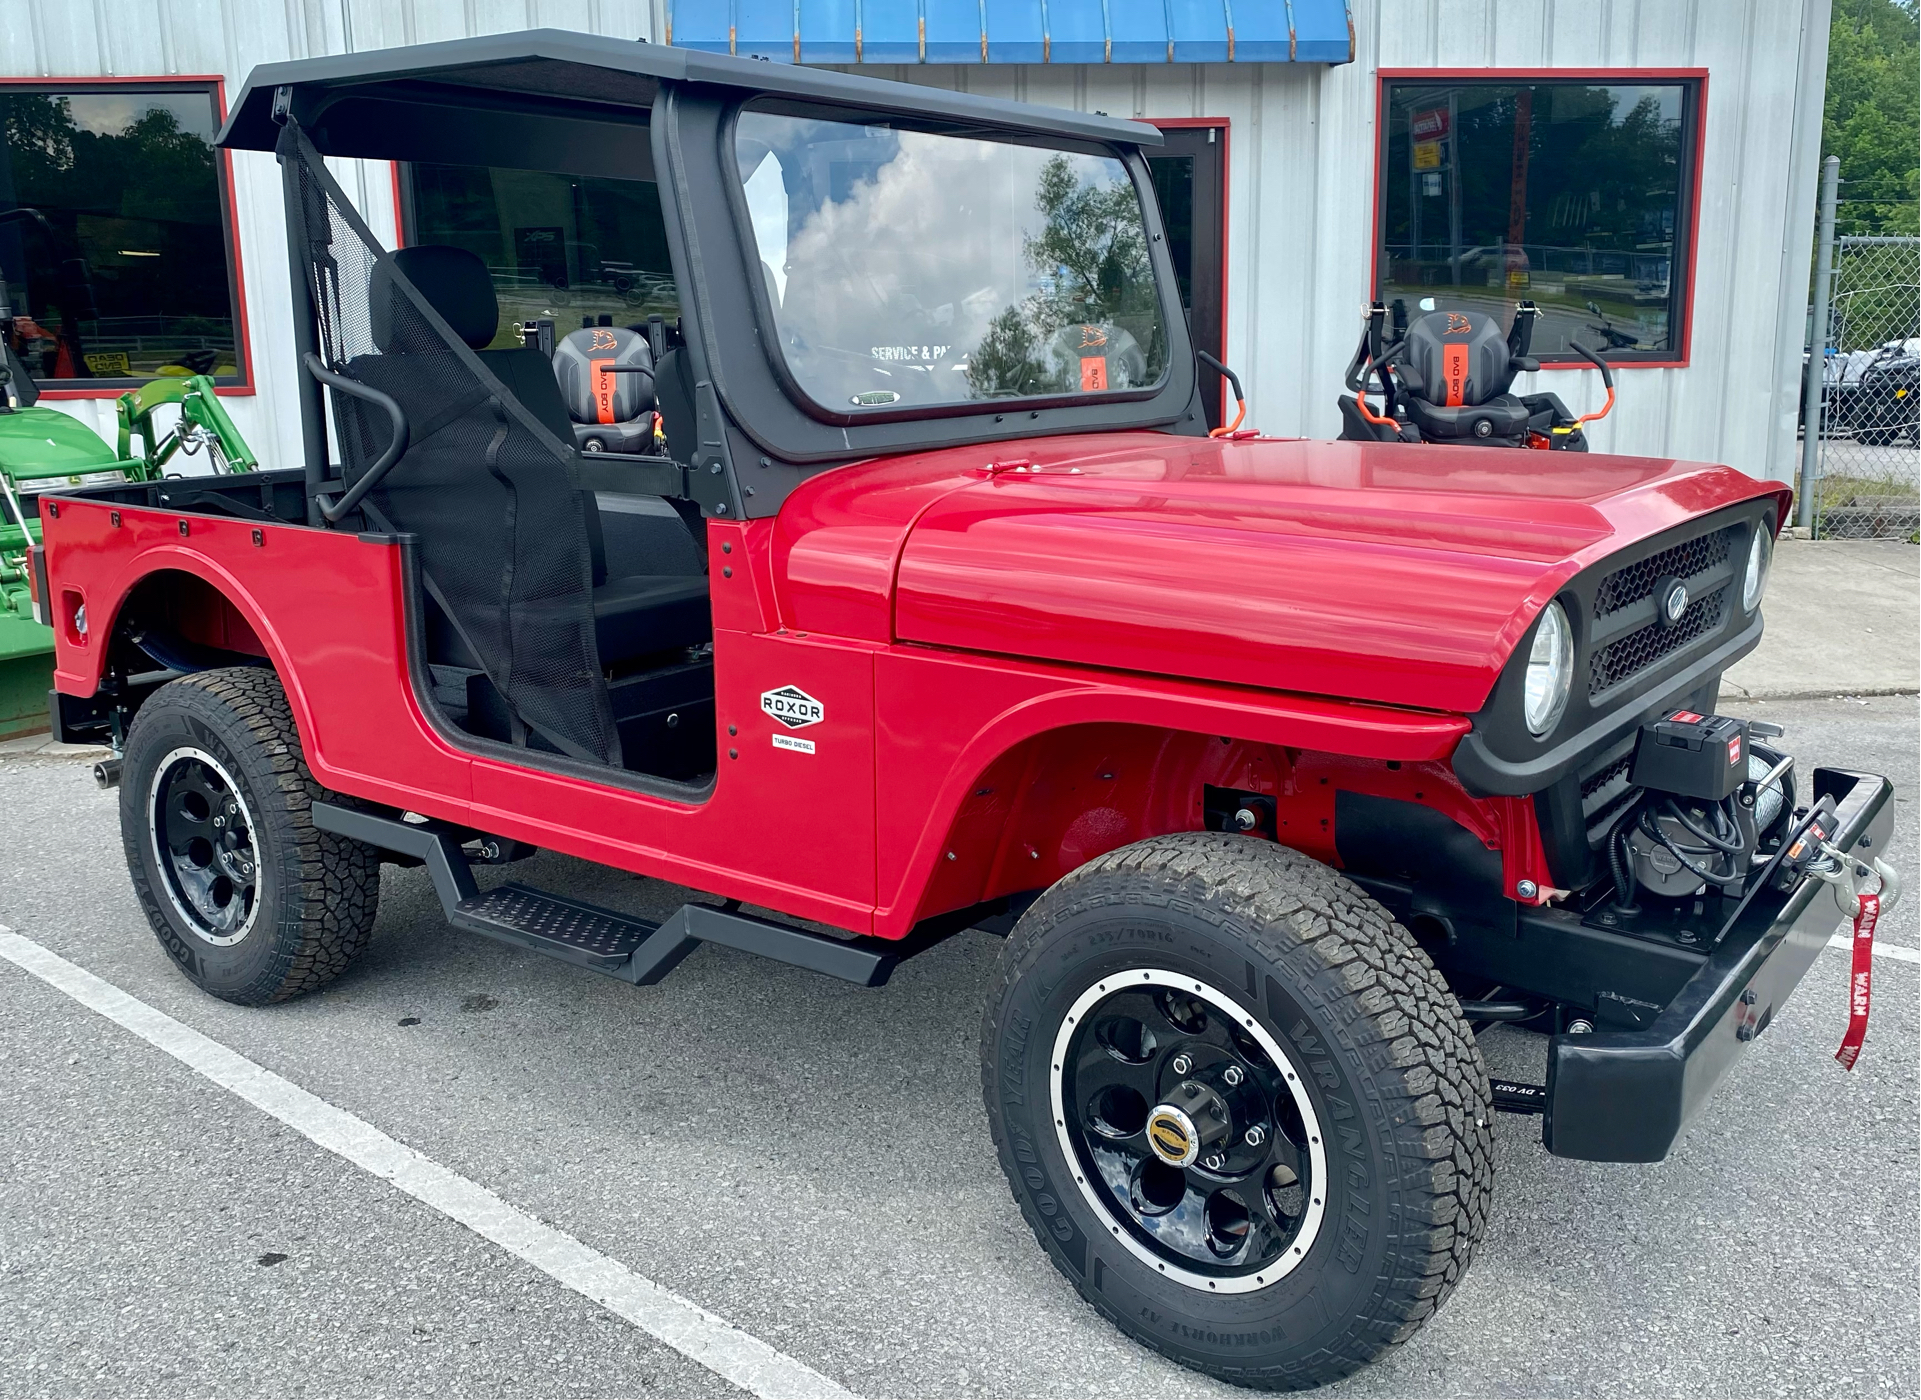 2022 Mahindra Roxor Base Model in Crossville, Tennessee - Photo 2